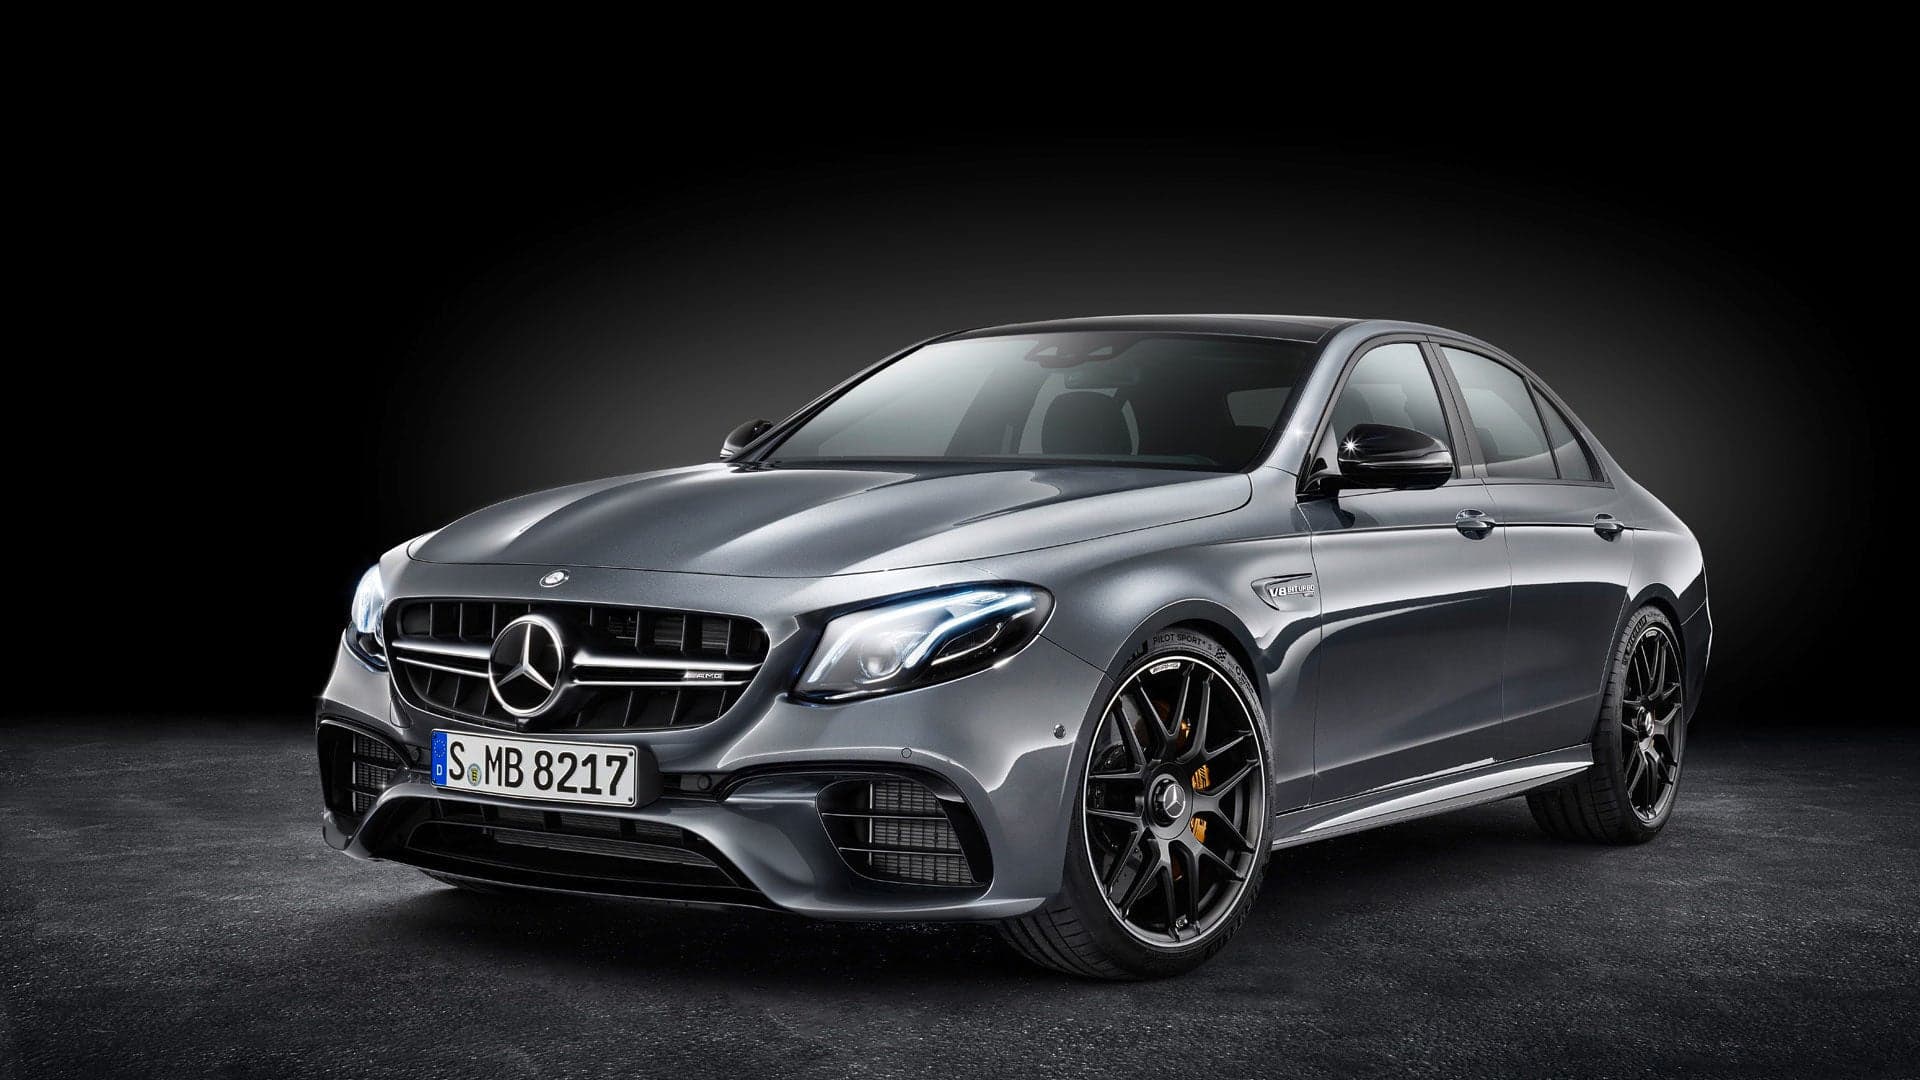 Mercedes-AMG Unveils E63 Ahead Of LA Auto Show and Roush May Have A Monster F-150: The Evening Rush